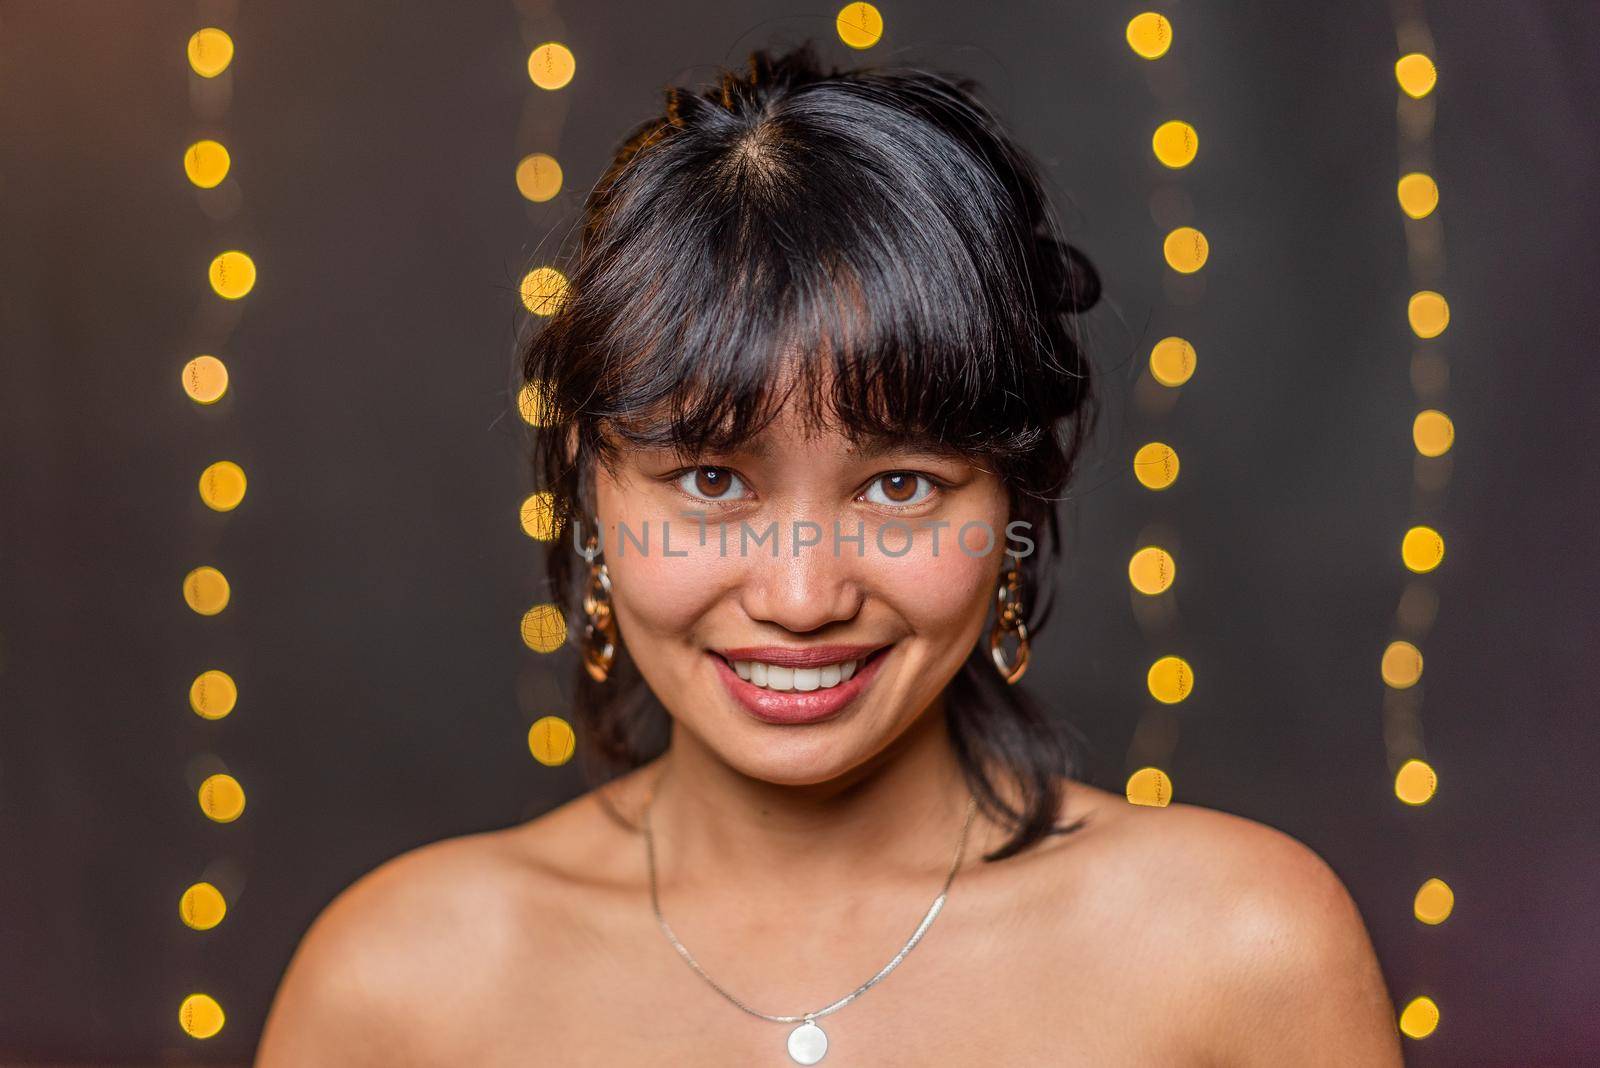 Portrait of an asian young woman smiling and looking at camera with a blurred light background with copy space